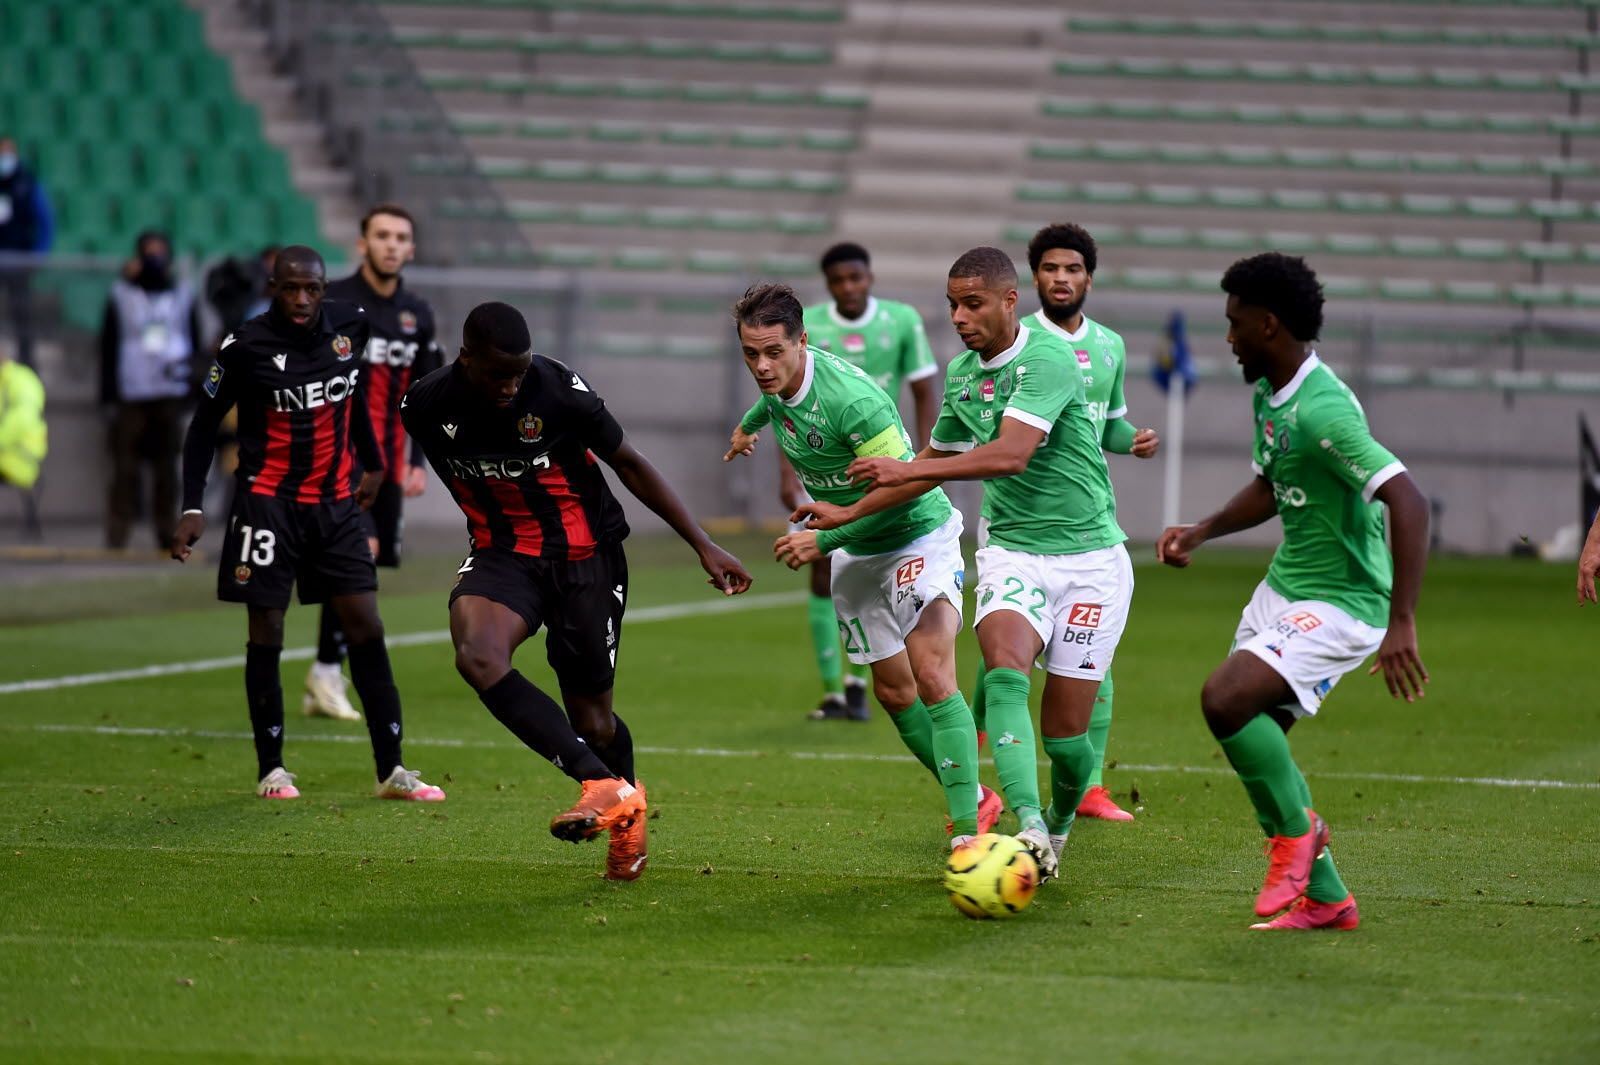 Nice square off against Saint-Etienne in their upcoming Ligue 1 fixture